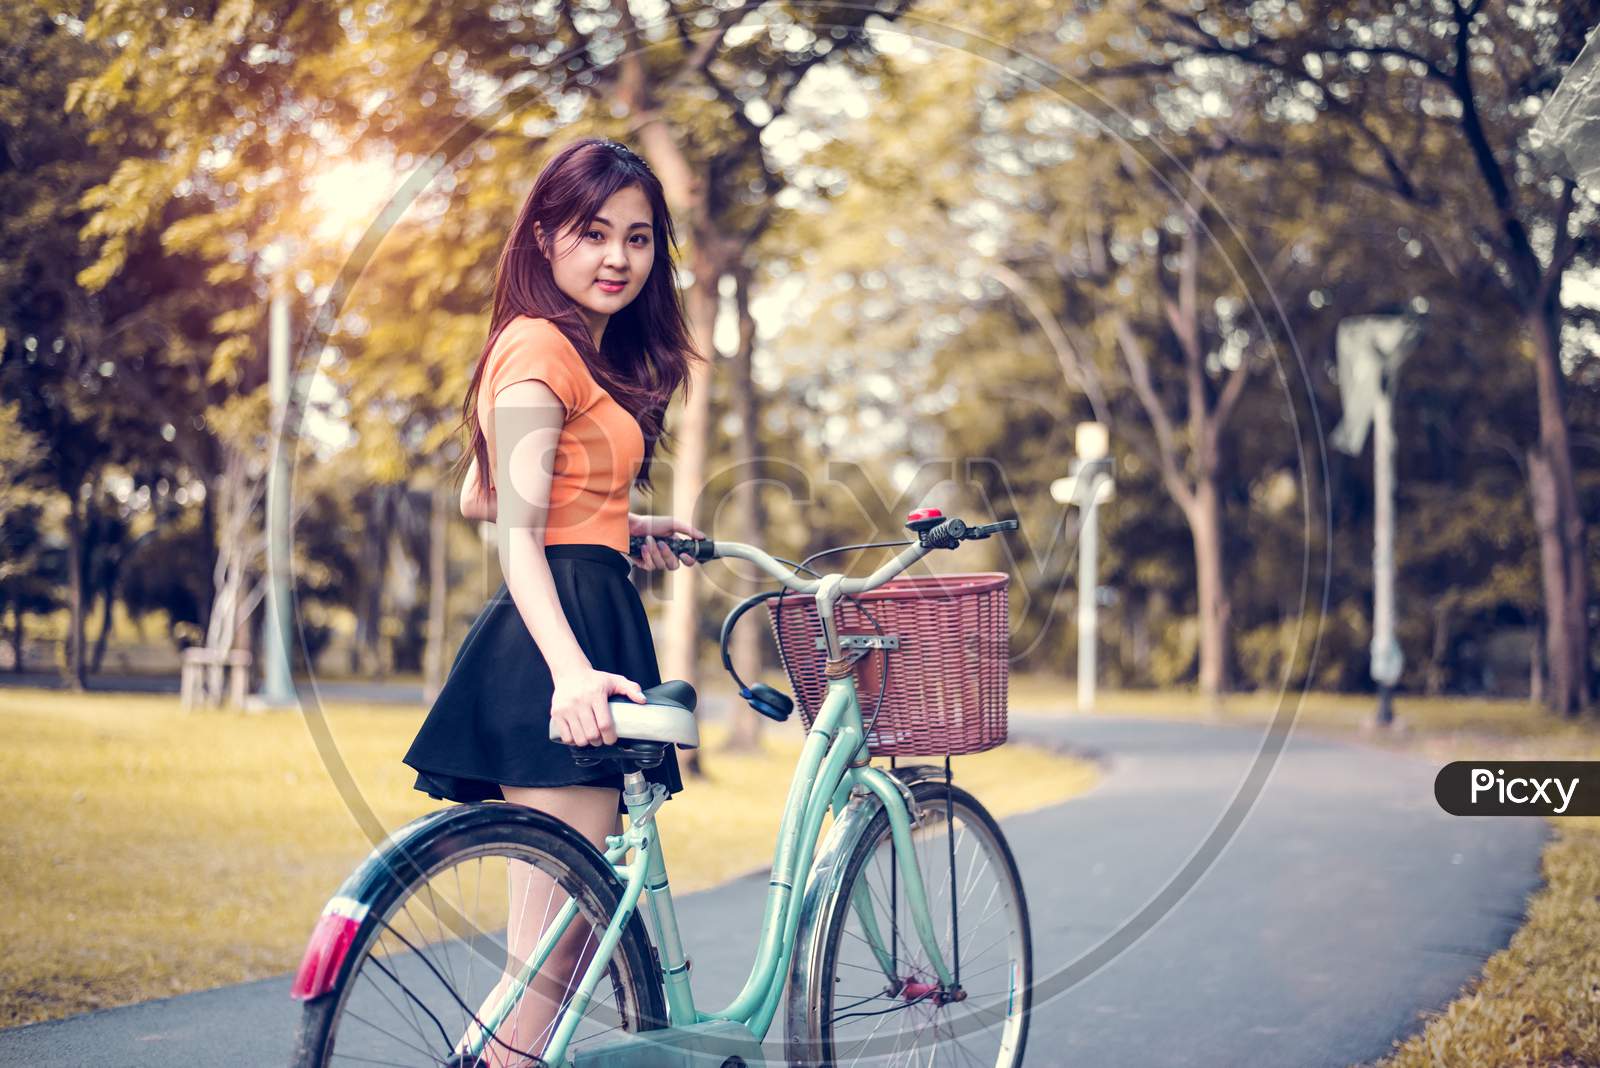 Asian Woman Portrait In Public Park With Bicycle. People And Lifestyles Concept. Relaxation And Activity Theme.